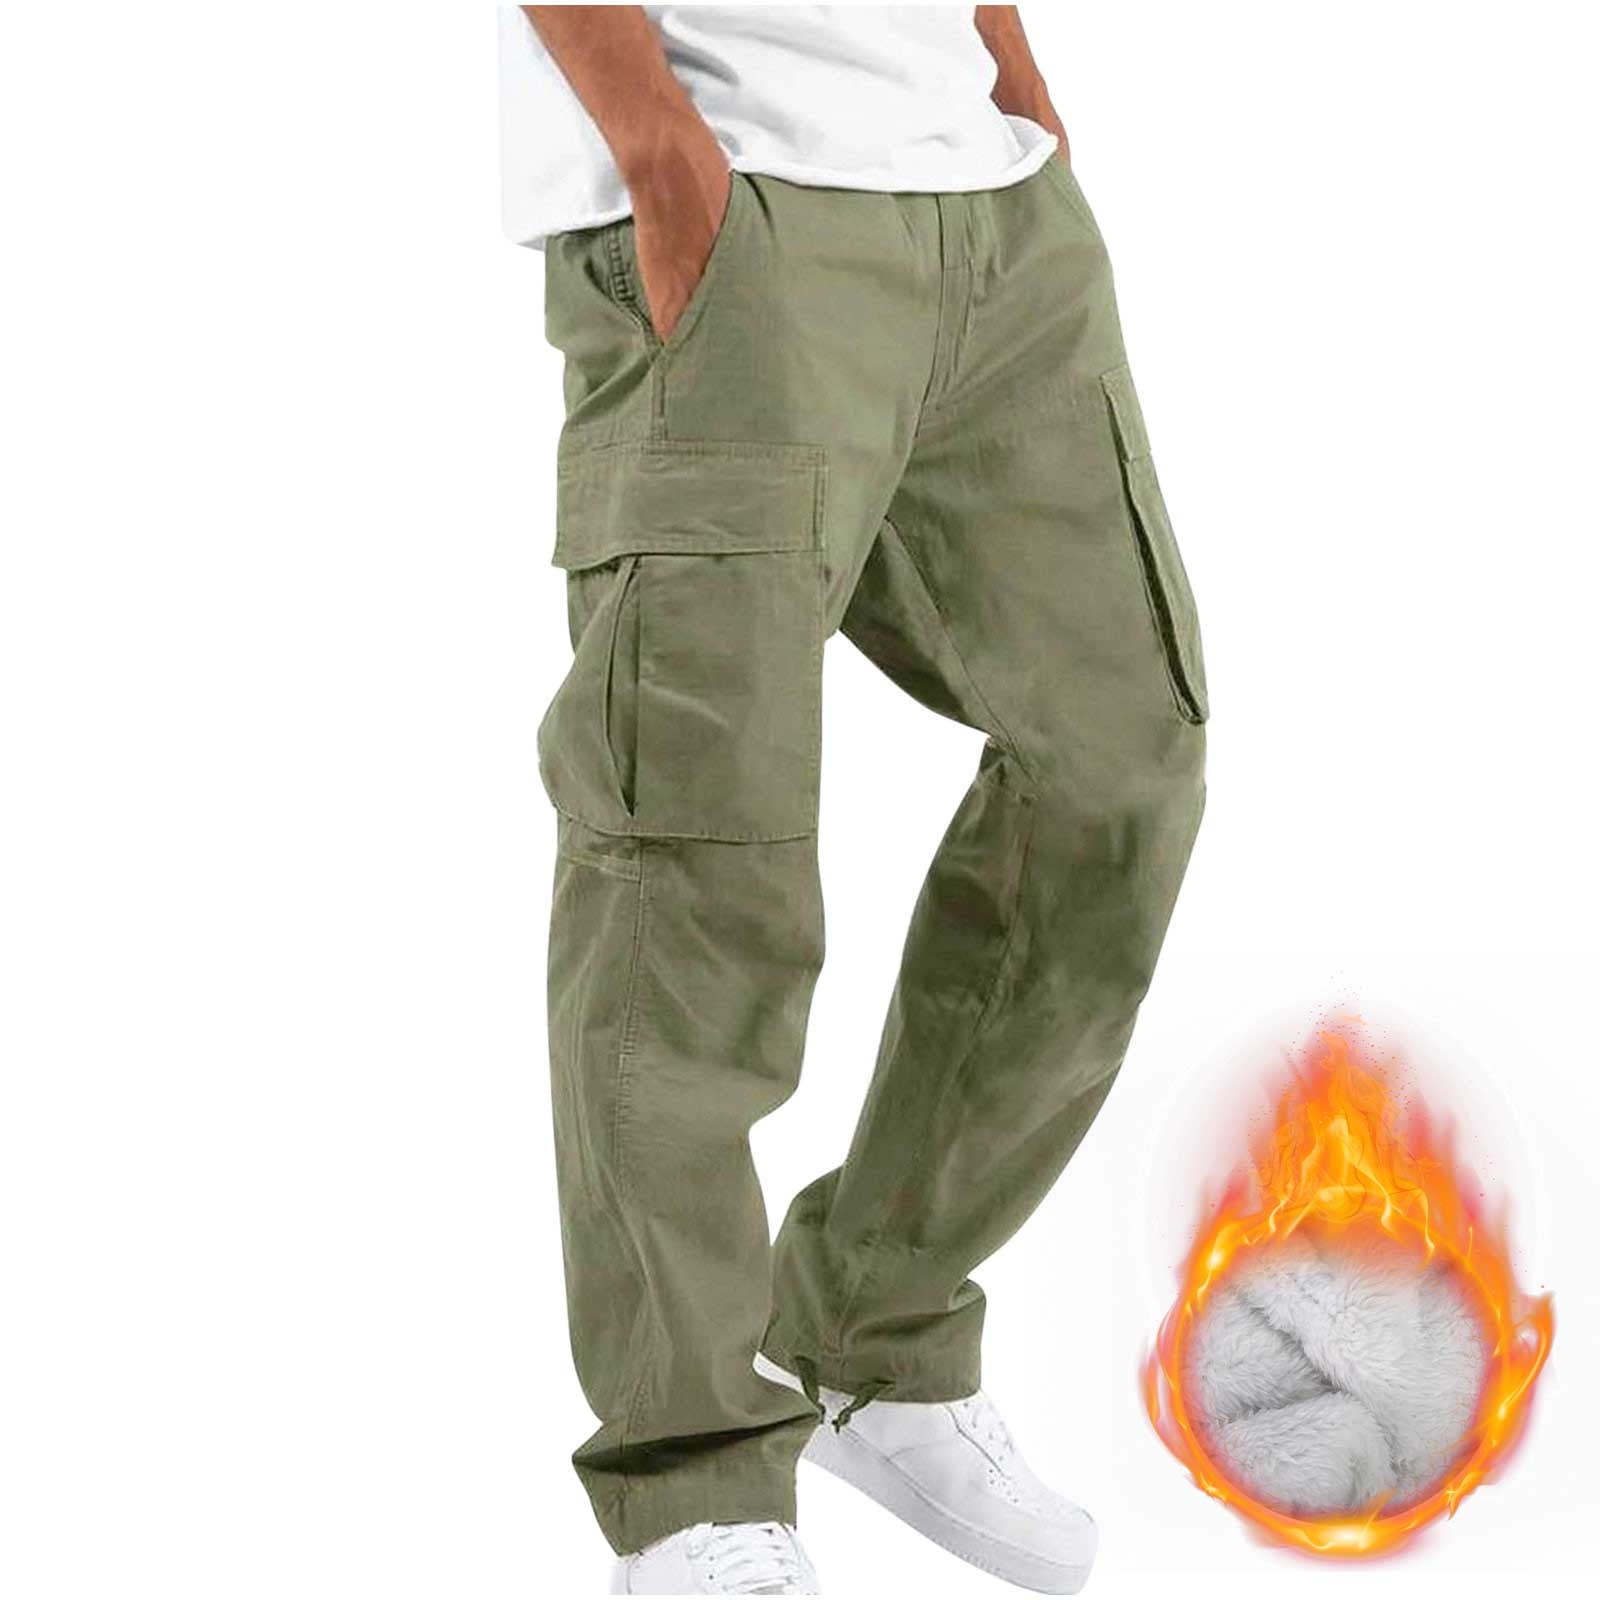 Mens Reflective Mens Skinny Cargo Trousers Autumn/Winter Streetwear Hip Hop  Straight Style With Zipper, Multi Pocket Design, And Drawstring Closure  From Goodbag118, $10.19 | DHgate.Com